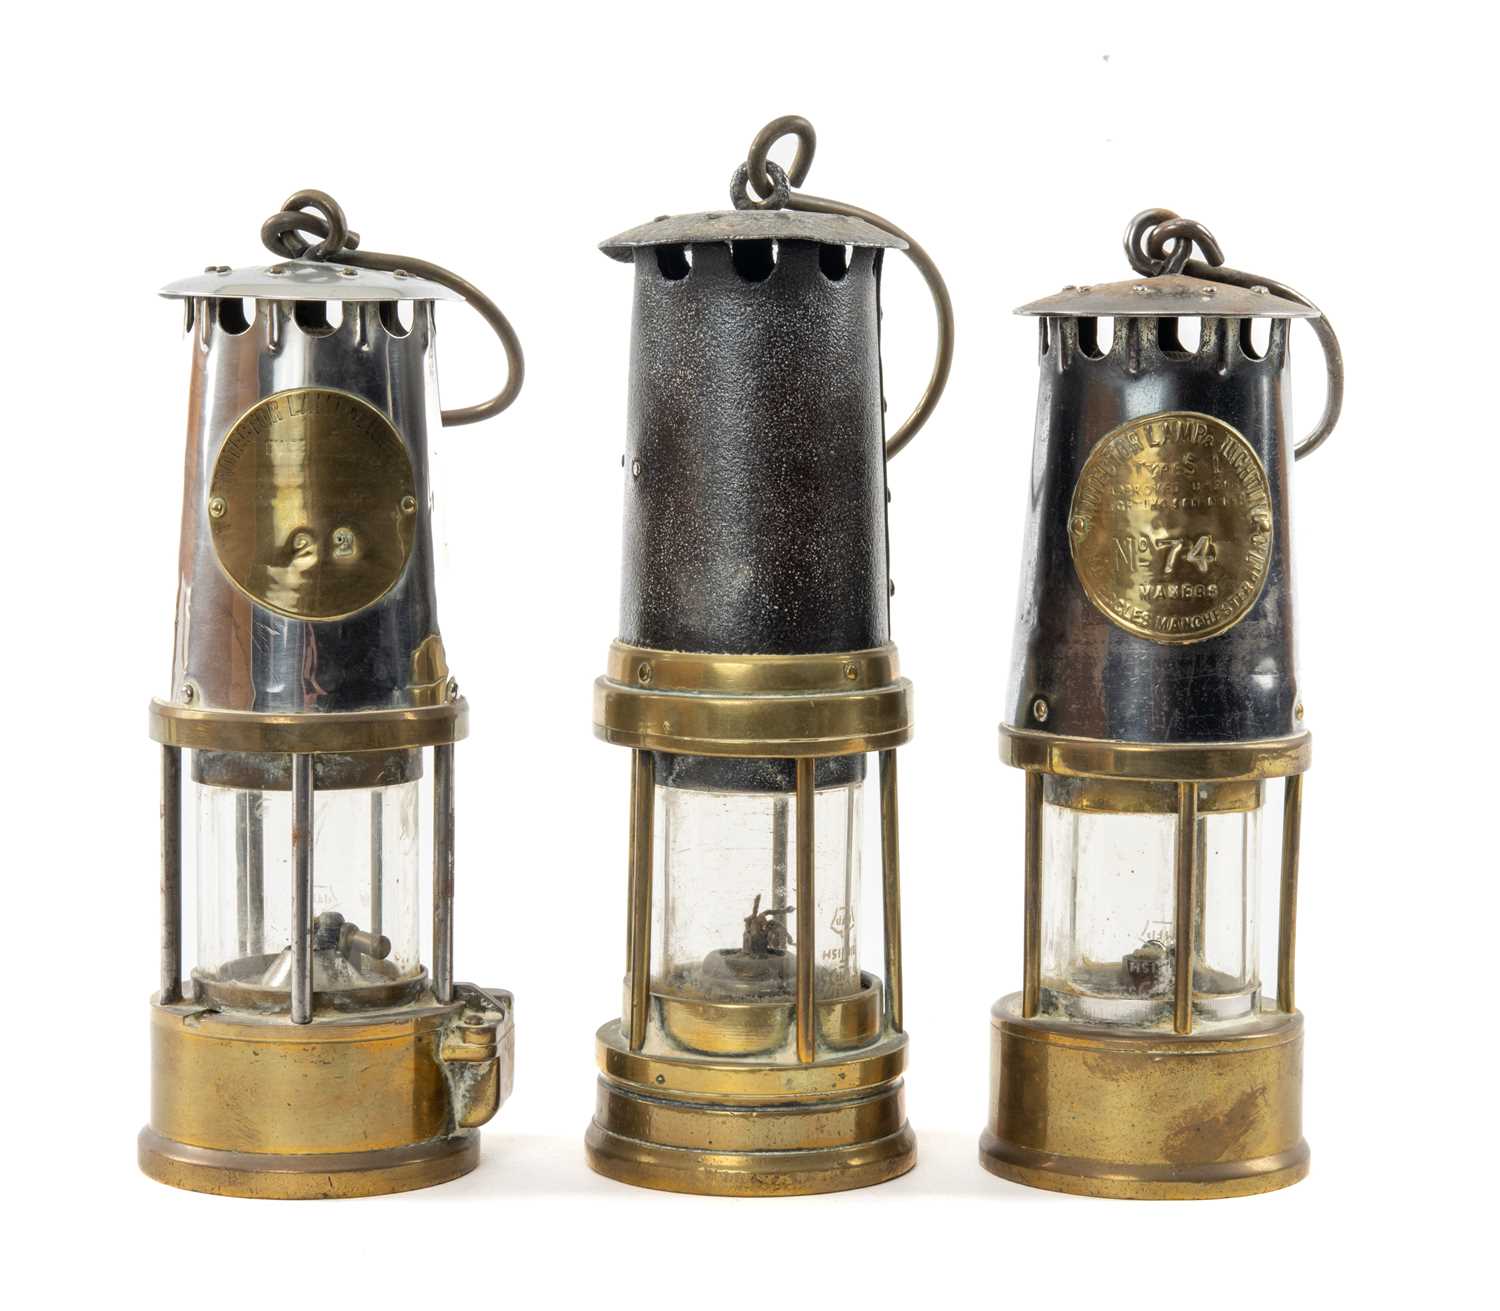 THREE MINER'S SAFETY LAMPS, including 2x Type S1 lamps by The Protector Lamp & Lighting Co. Ltd.